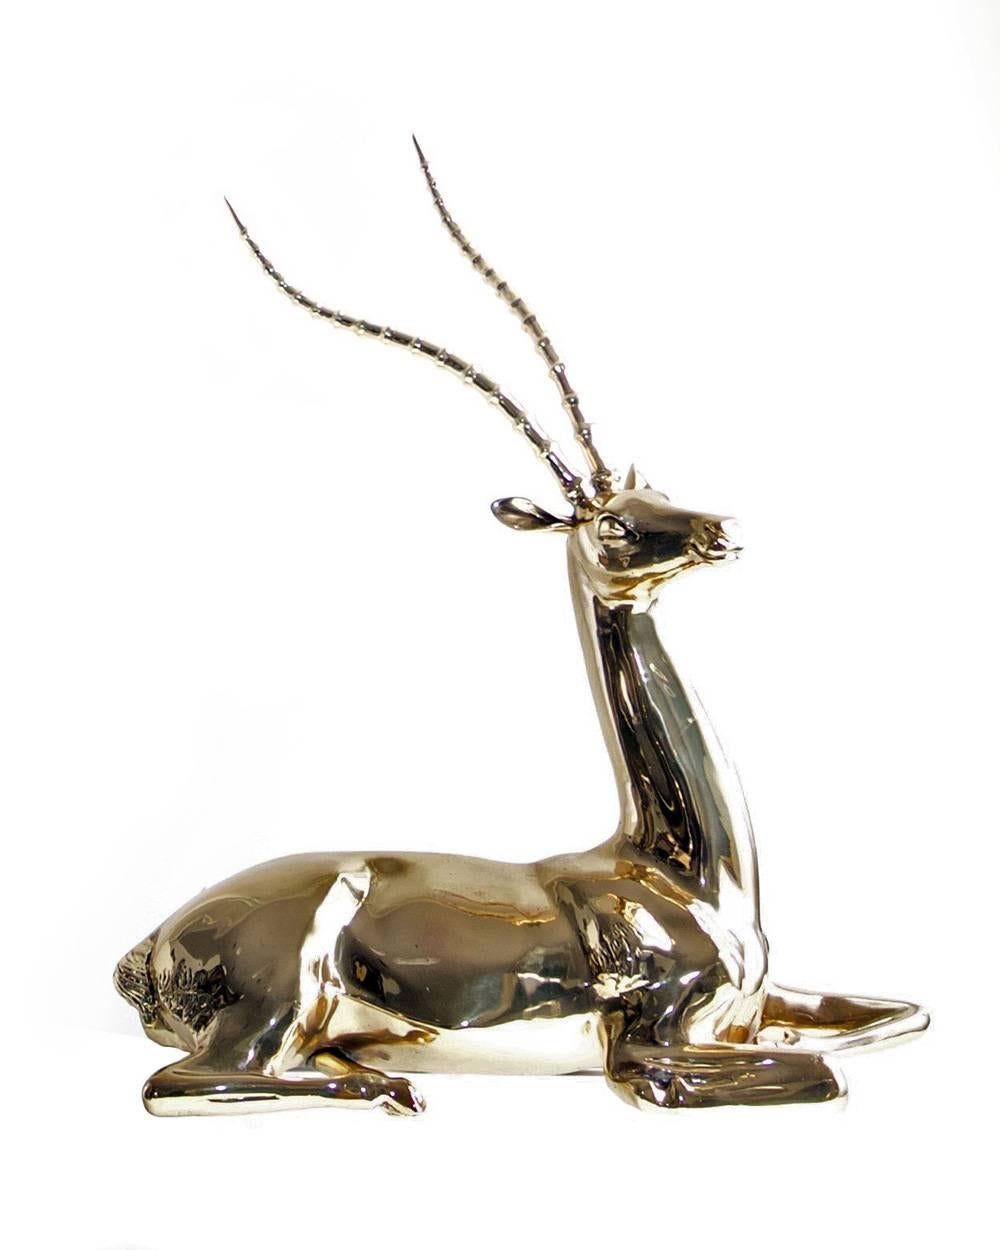 Restored Mid-20th Century Brass Sculpture of Impala on Natural Edge Wood Bas In Excellent Condition For Sale In Houston, TX